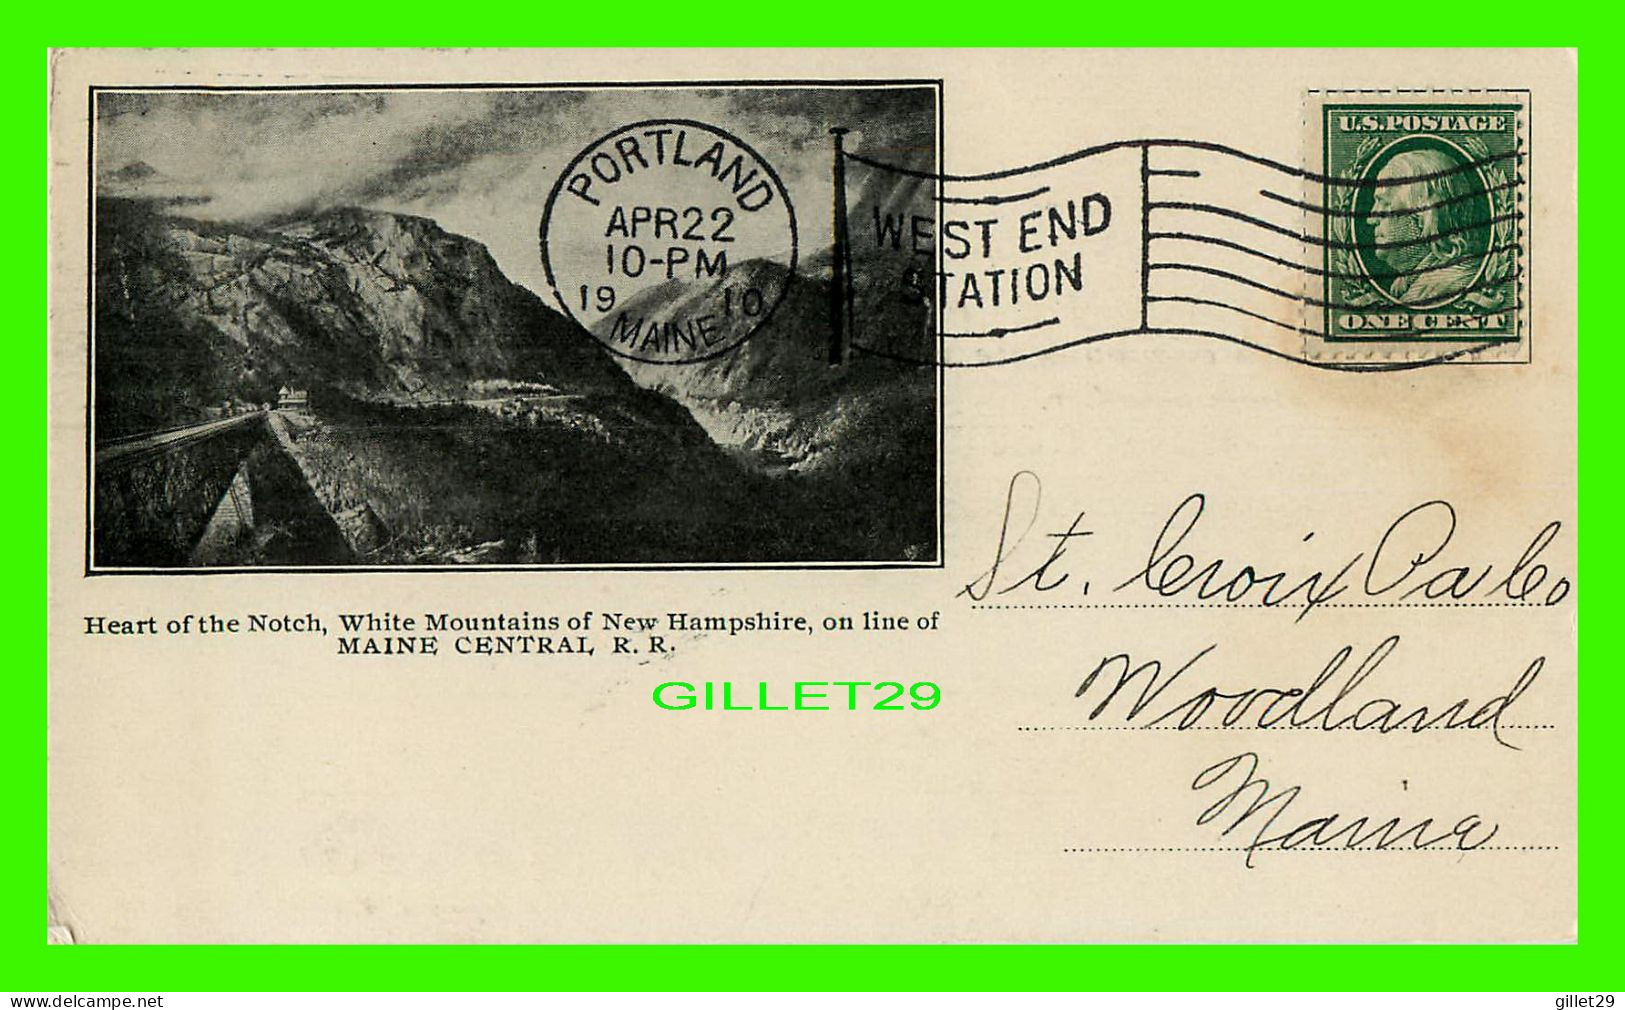 WHITE MOUNTAINS, NH - HEART OF THE NOTCH ON LINE OF MAINE CENTRAL, R. R. - TRAVEL IN 1910 - - White Mountains